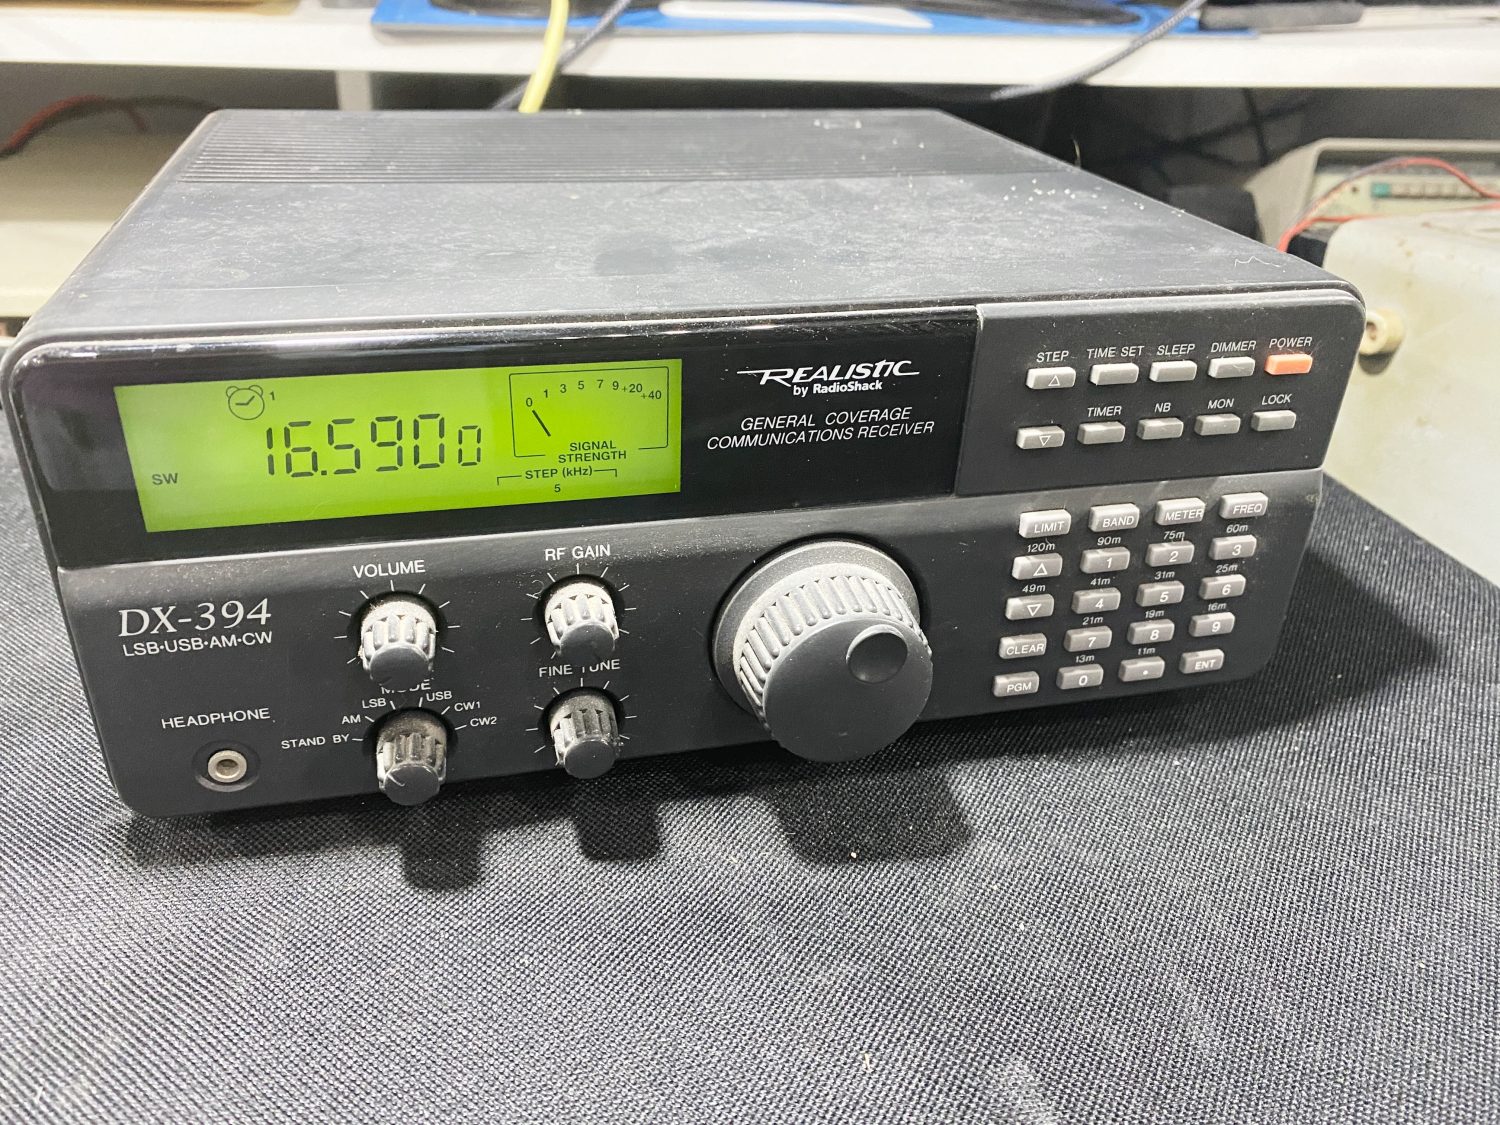 I think we have all owned one of these at one point. the Realistic DX-394 Receiver.